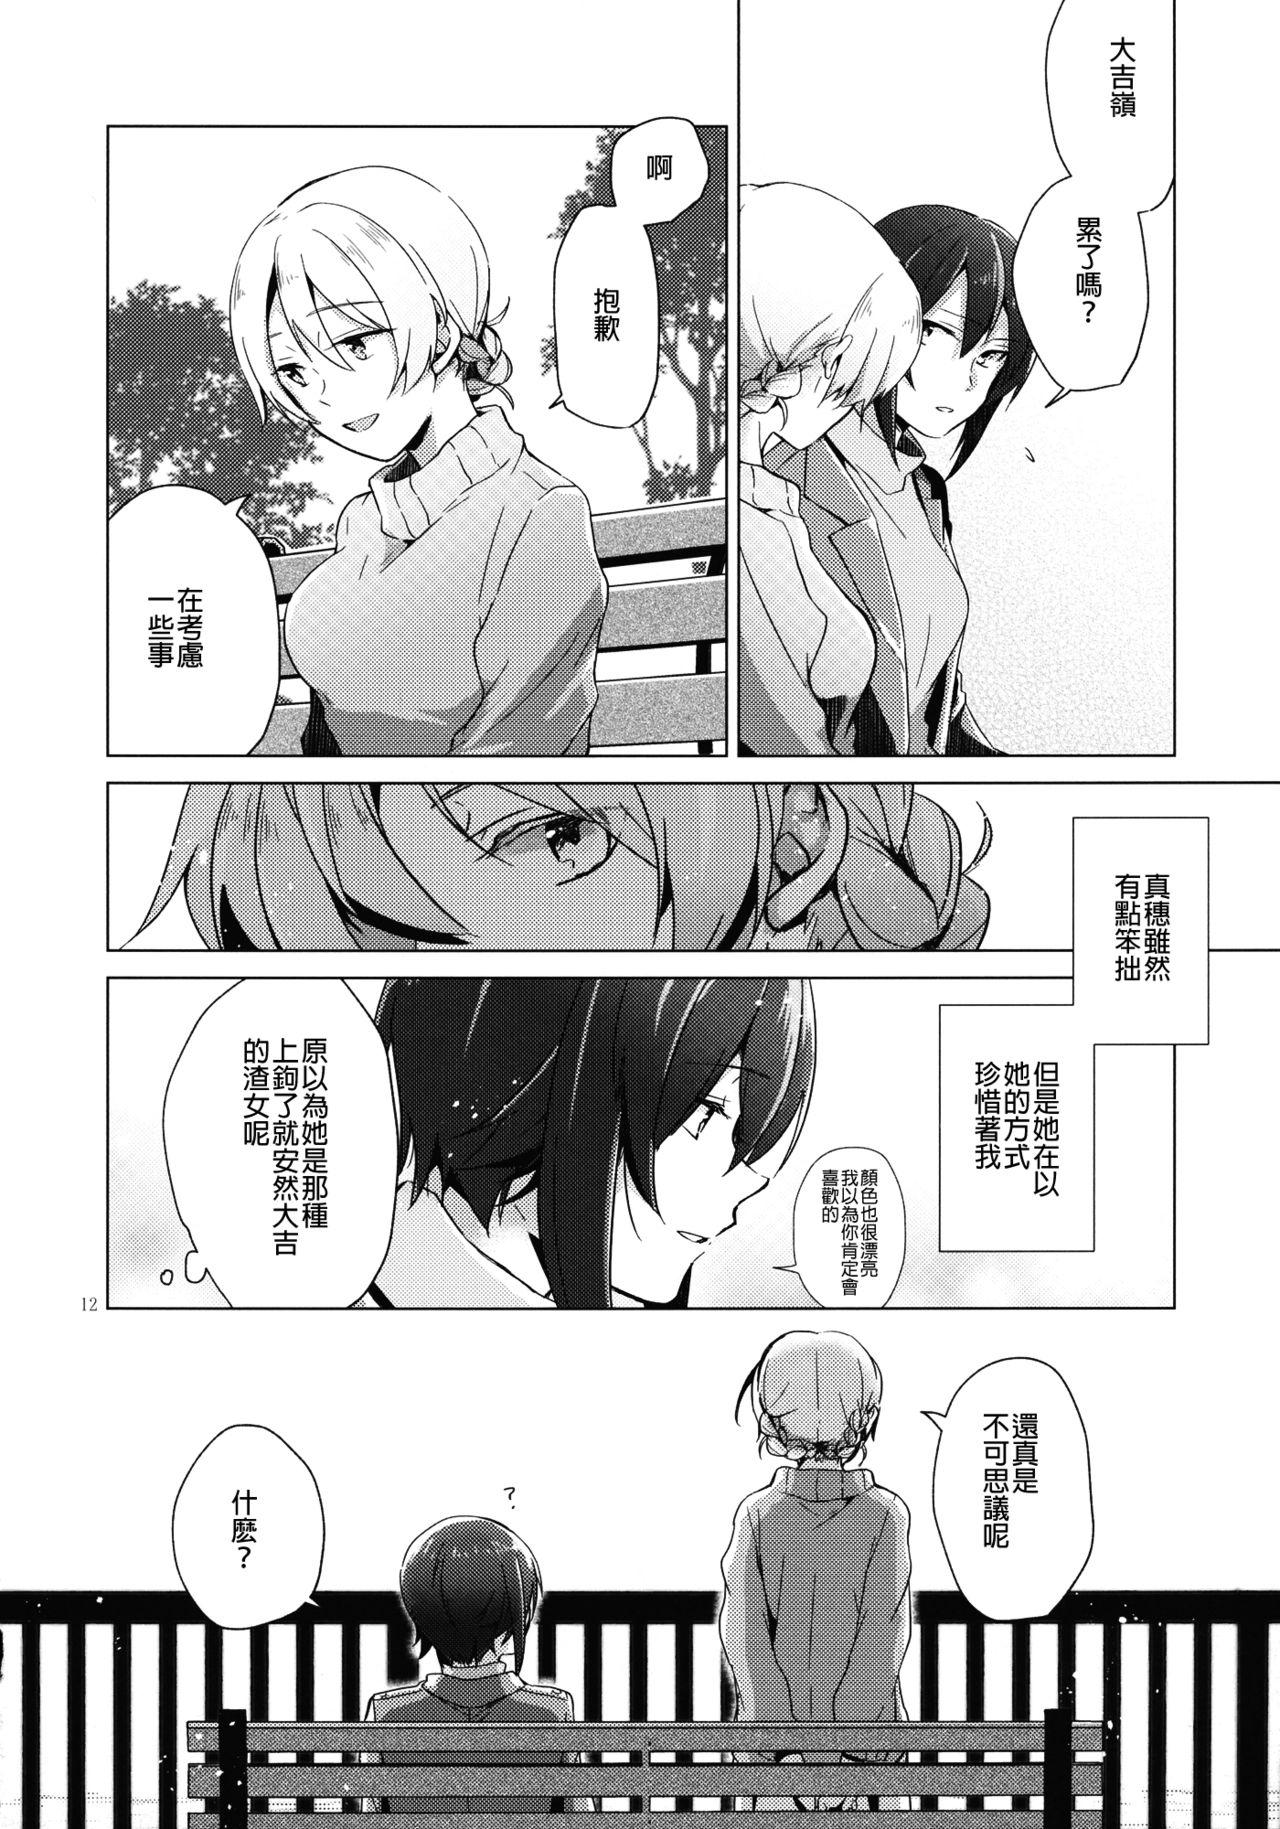 Bj Over Time | 超時 - Girls und panzer Bhabi - Page 12